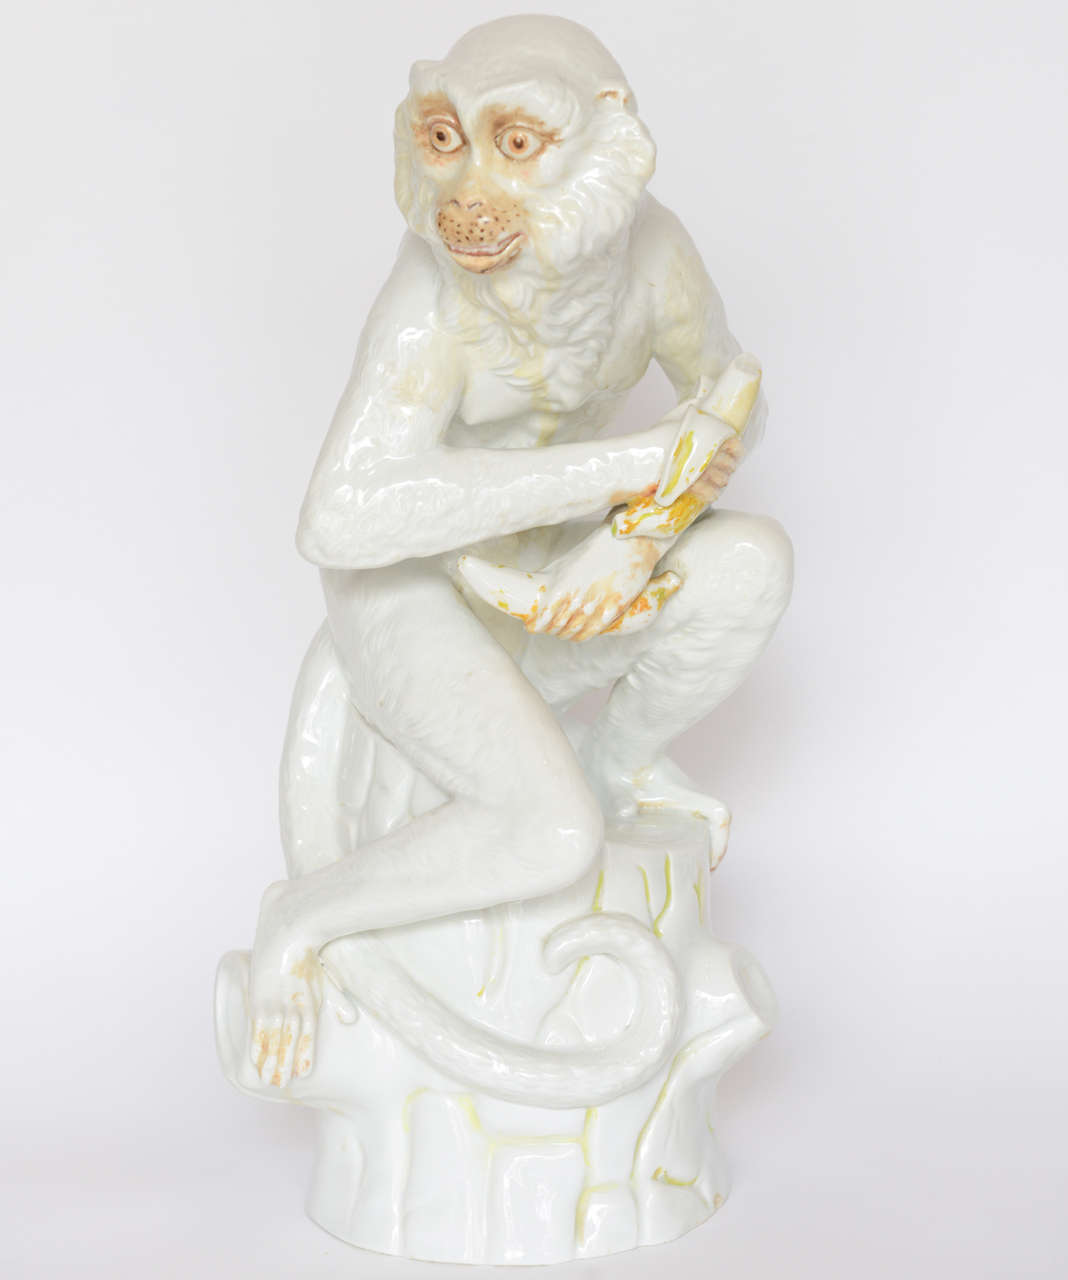 Seated Monkey Holding two Bananas bearing the signature
RPM and the # 6393.